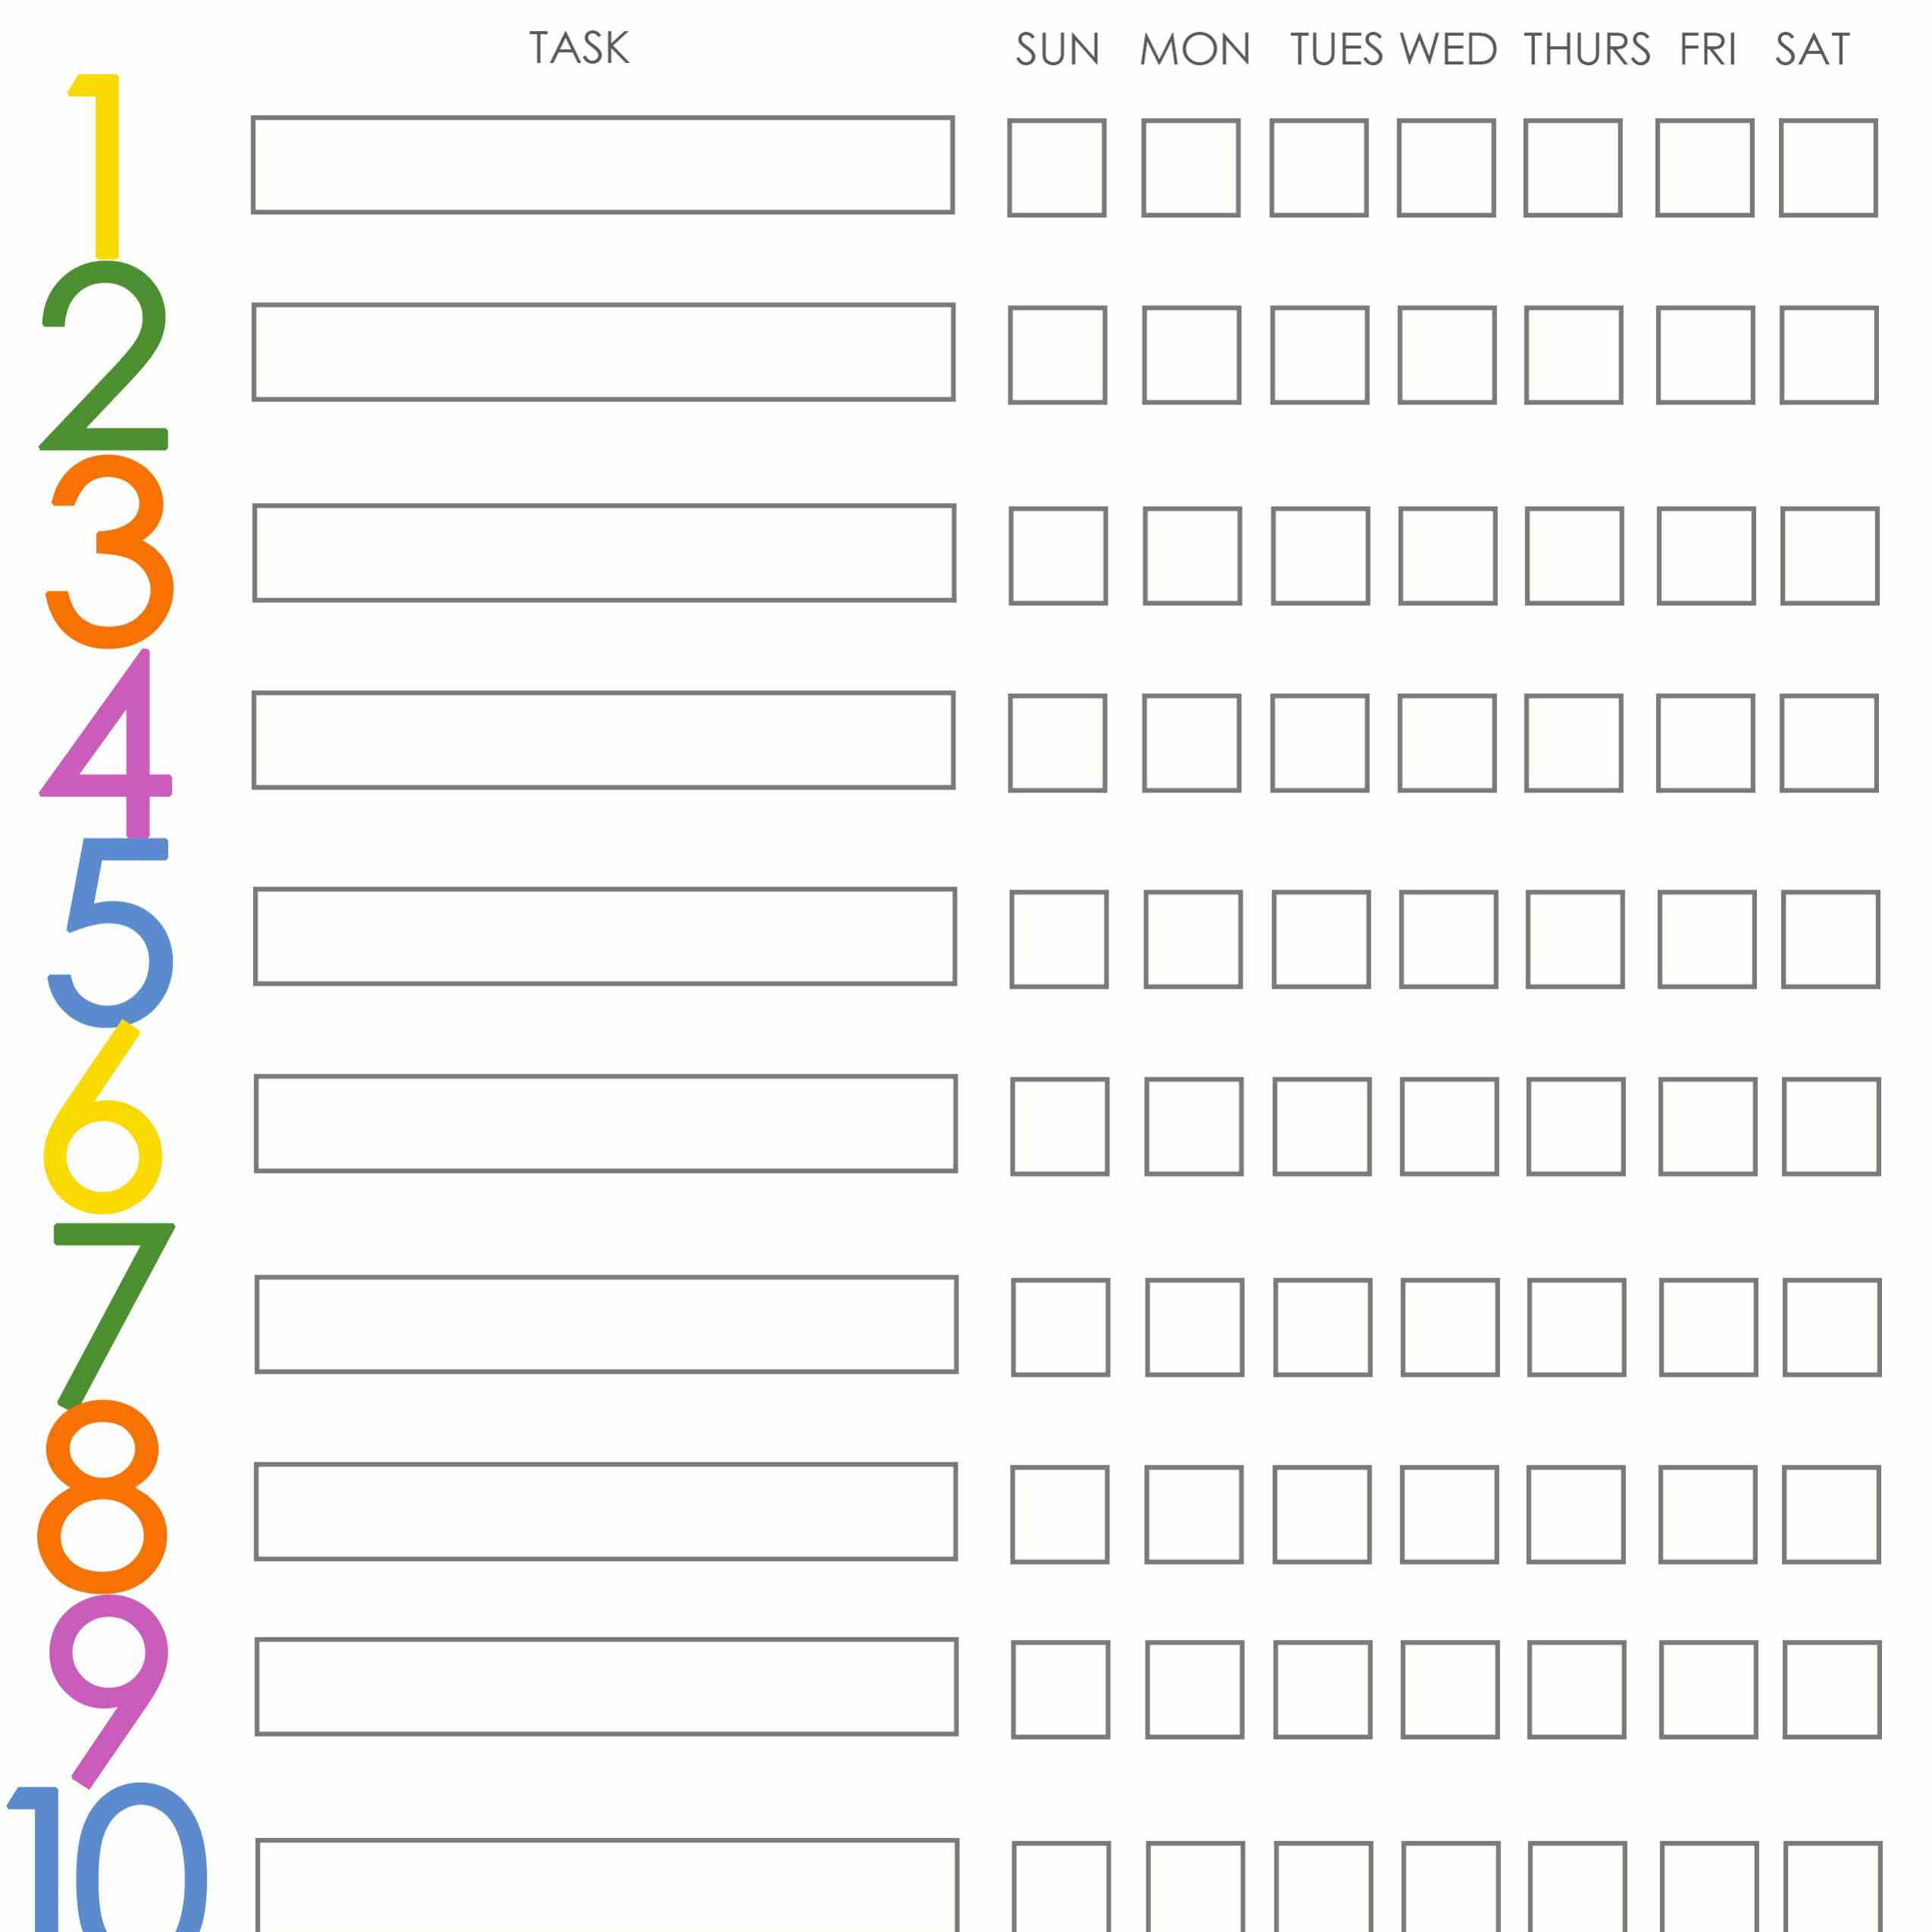 Children's Allowance Spreadsheet Throughout Free Printable Weekly Chore Charts